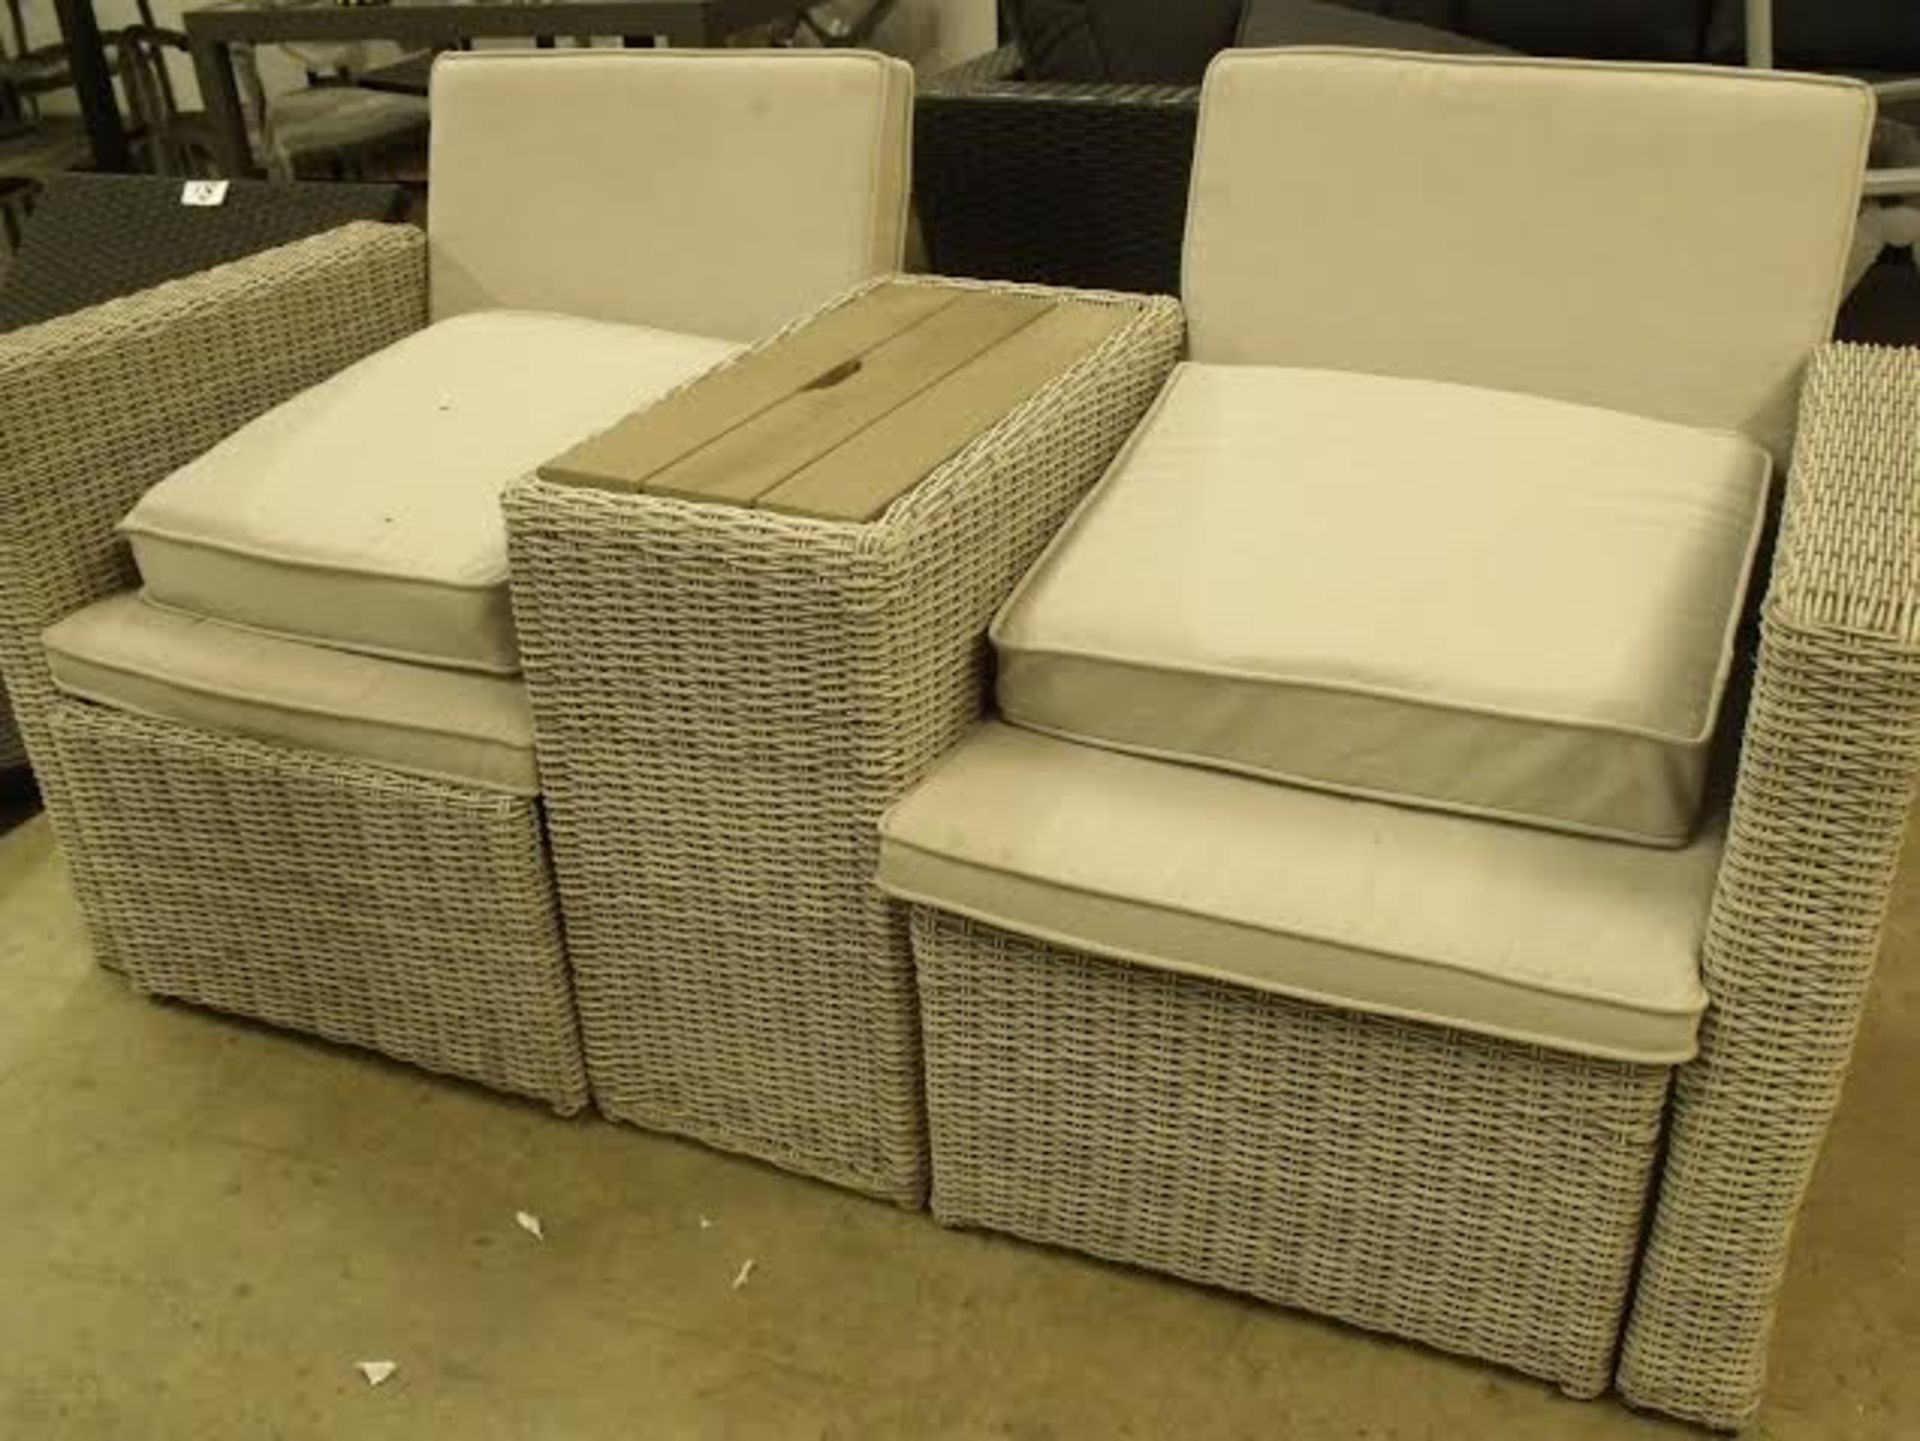 EXECUTIVE HIS n HERS RECLINING LOUNGE SET FULL ROUND MULTI GREY RATTAN 2 X STOW AWAY FOOTSTOOLS